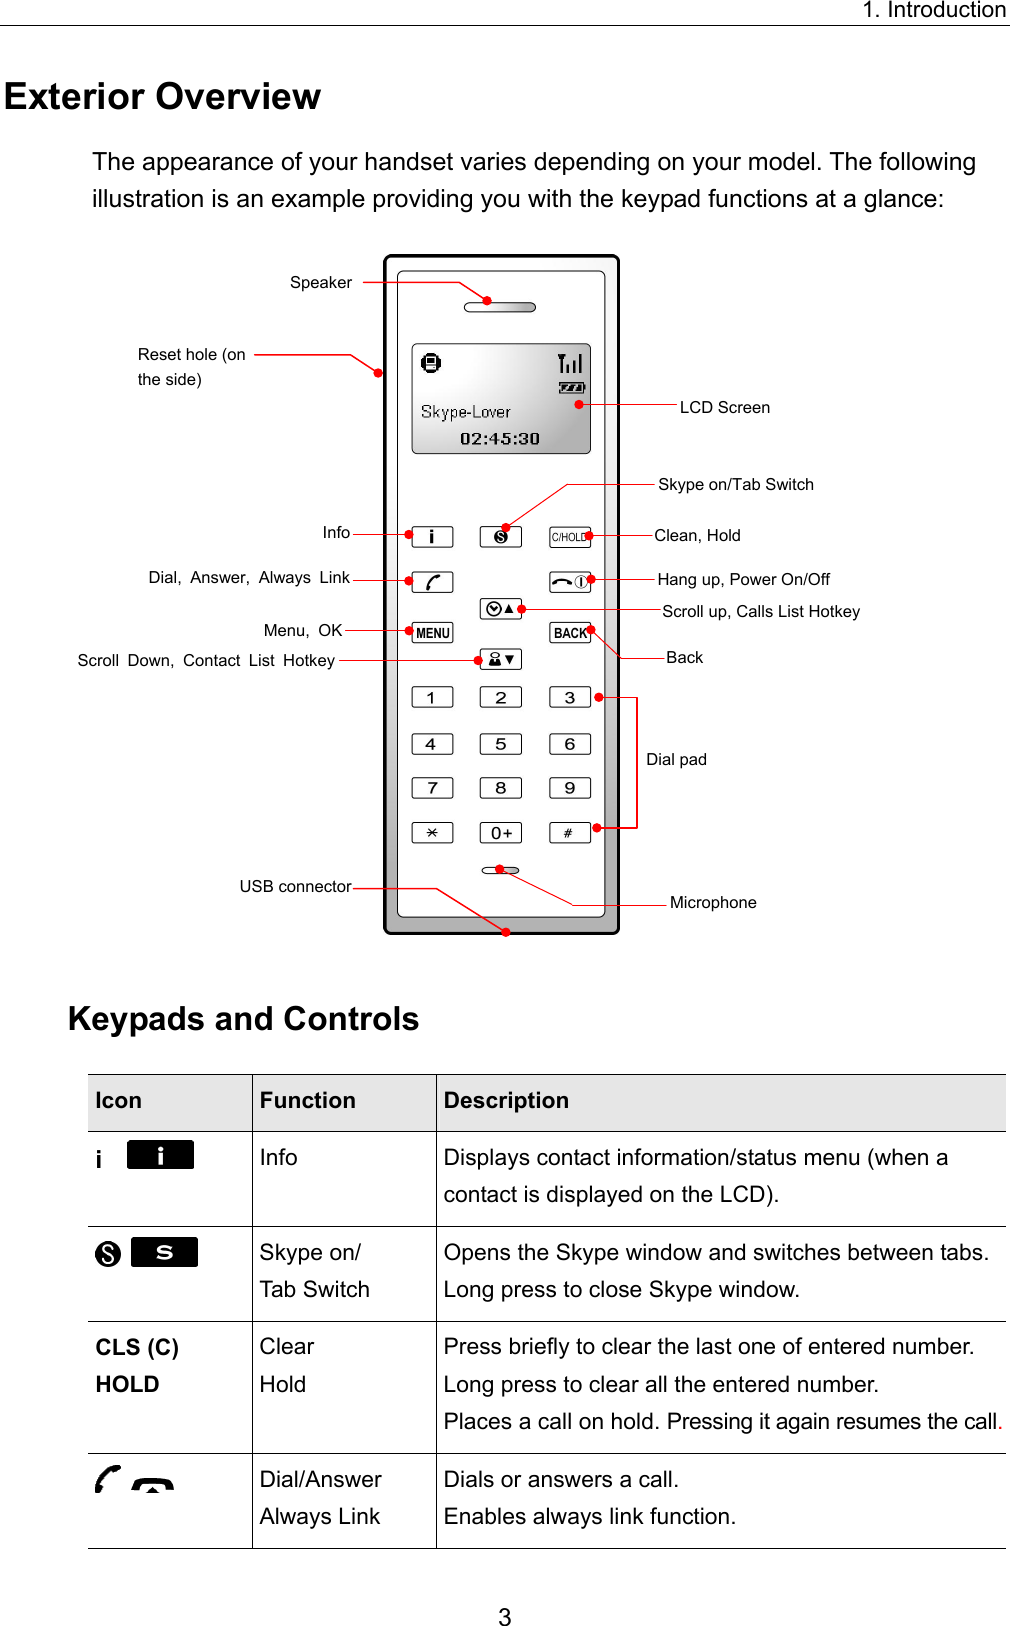 1. Introduction Exterior Overview The appearance of your handset varies depending on your model. The following illustration is an example providing you with the keypad functions at a glance:  Speaker Reset hole (on the side) LCD Screen Clean, Hold Skype on/Tab Switch InfoDial, Answer, Always Link Hang up, Power On/Off Scroll up, Calls List Hotkey Menu, OKBack Scroll Down, Contact List HotkeyDial padUSB connectorMicrophoneKeypads and Controls Icon  Function  Description i    Info  Displays contact information/status menu (when a contact is displayed on the LCD).       Skype on/ Tab Switch Opens the Skype window and switches between tabs.Long press to close Skype window. CLS (C) HOLD Clear Hold Press briefly to clear the last one of entered number. Long press to clear all the entered number. Places a call on hold. Pressing it again resumes the call.    Dial/Answer Always Link Dials or answers a call. Enables always link function. 3 